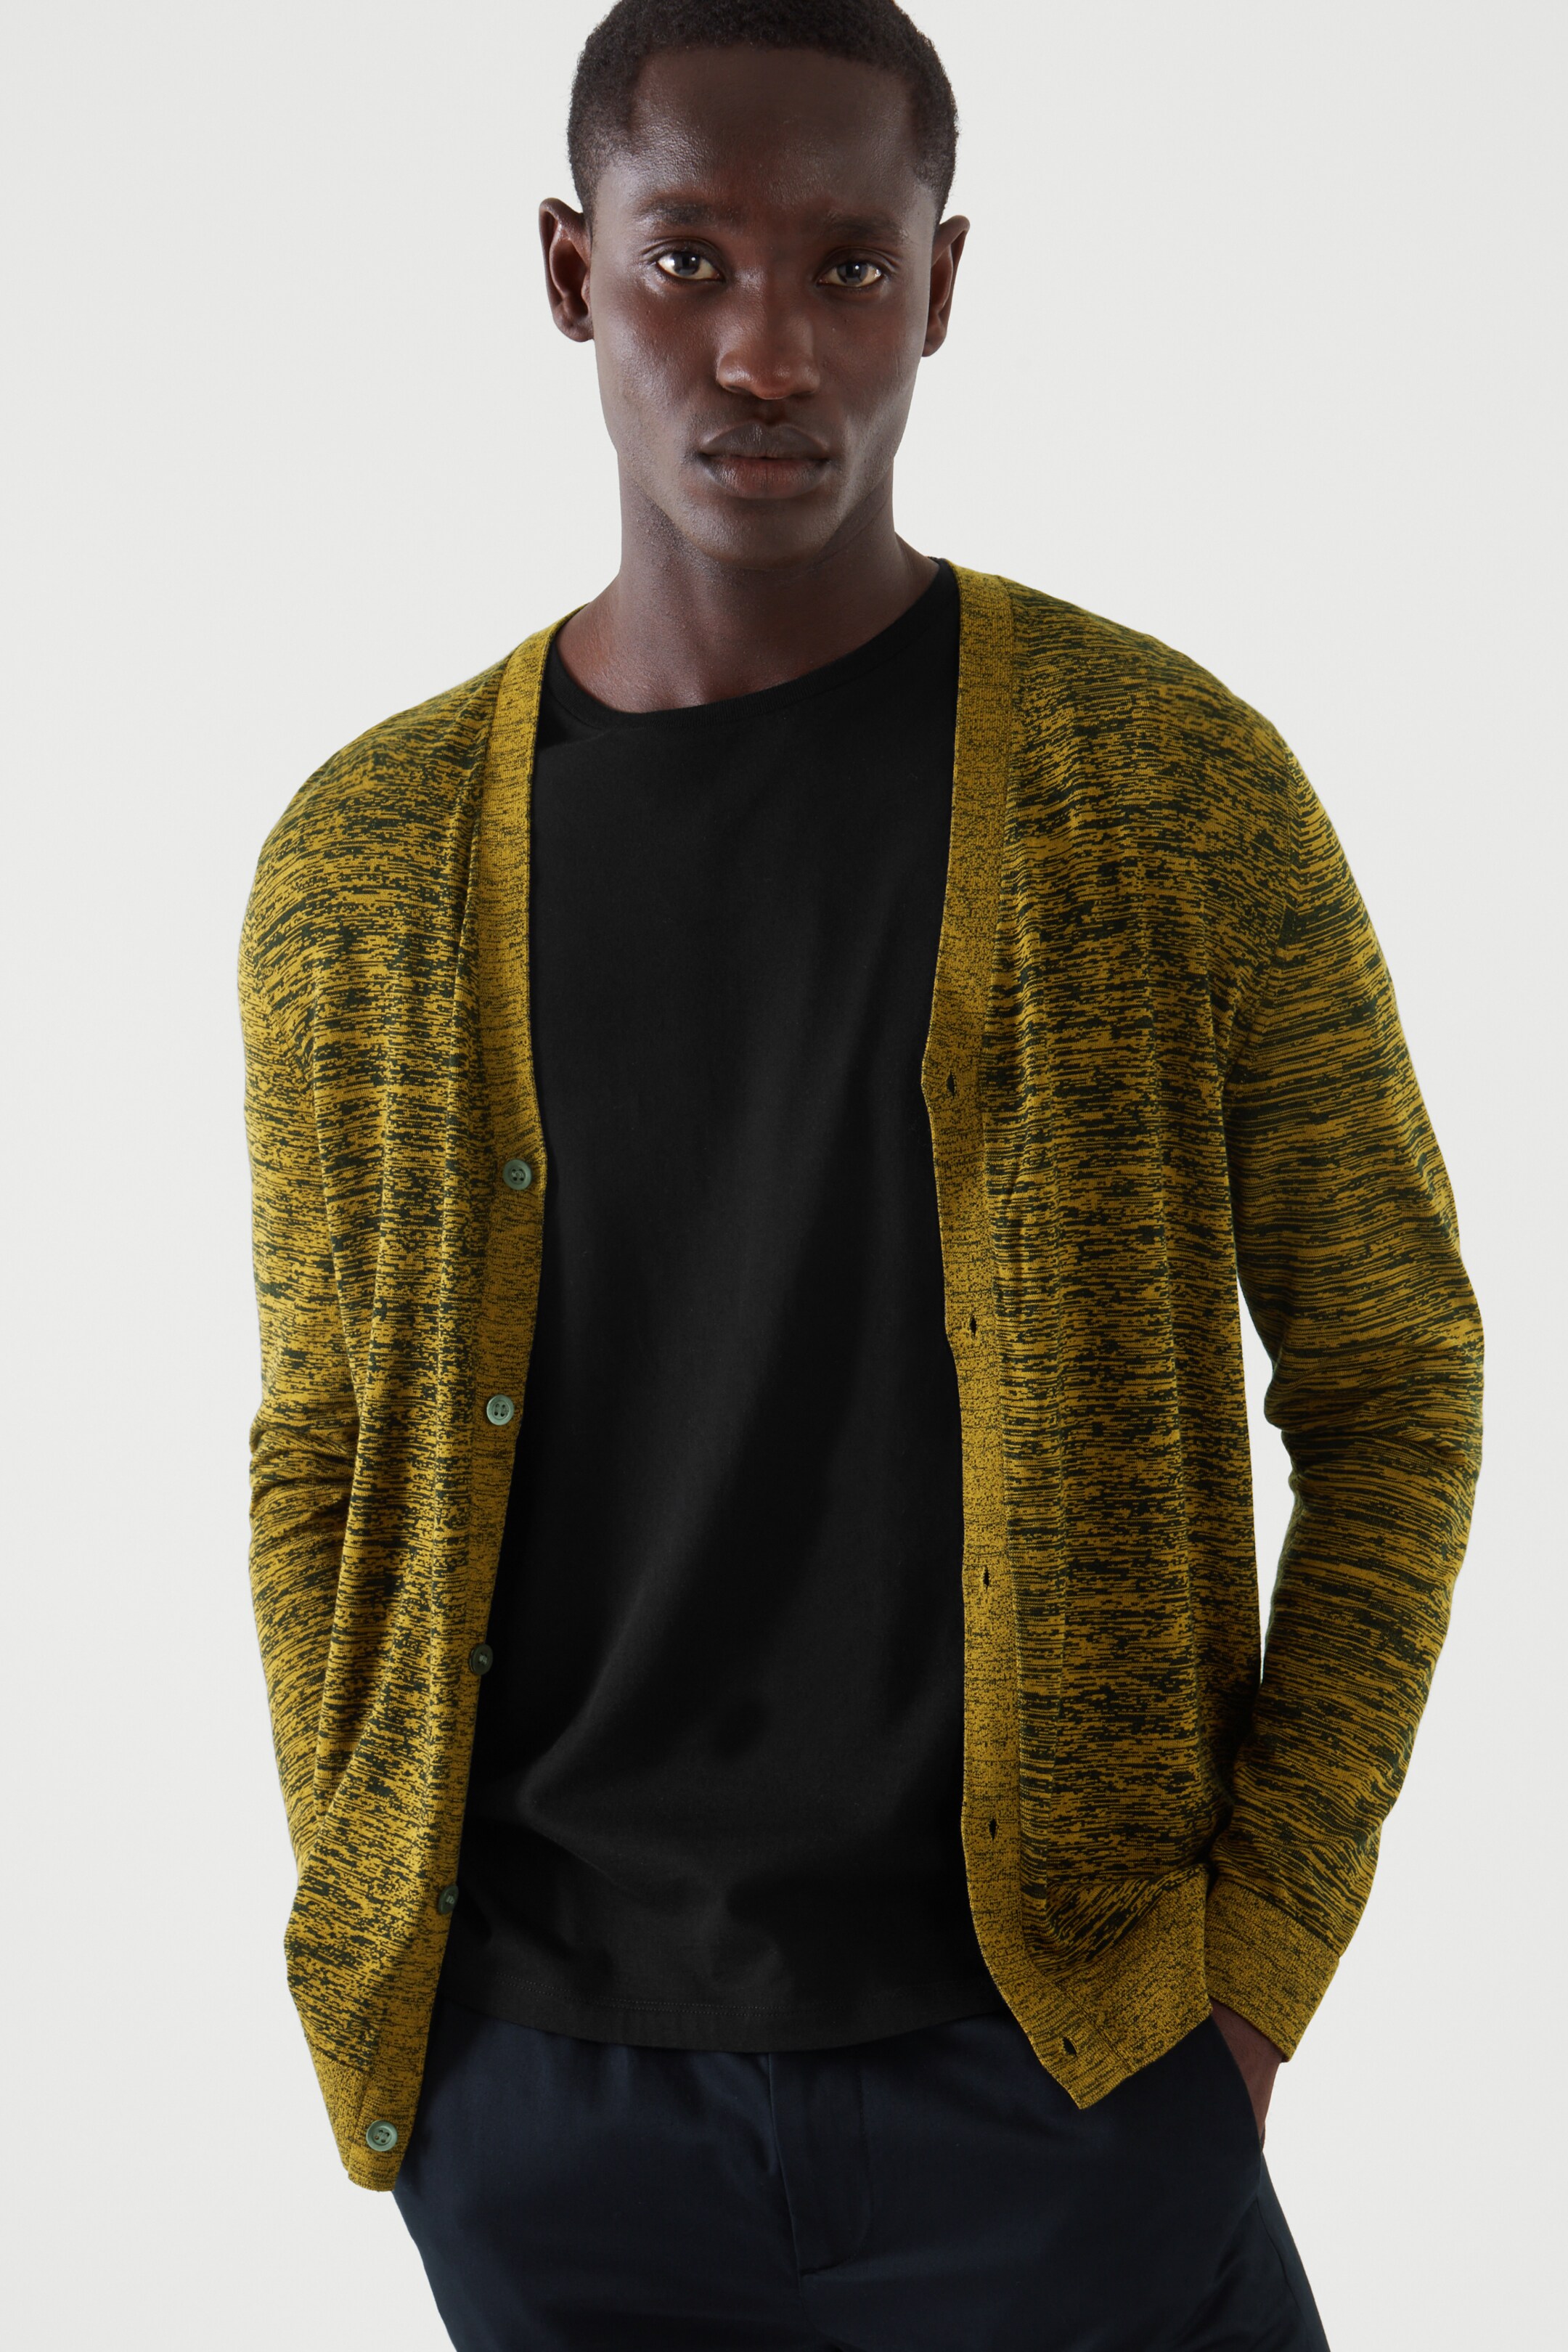 Front image of cos V-NECK CARDIGAN in mustard yellow / black